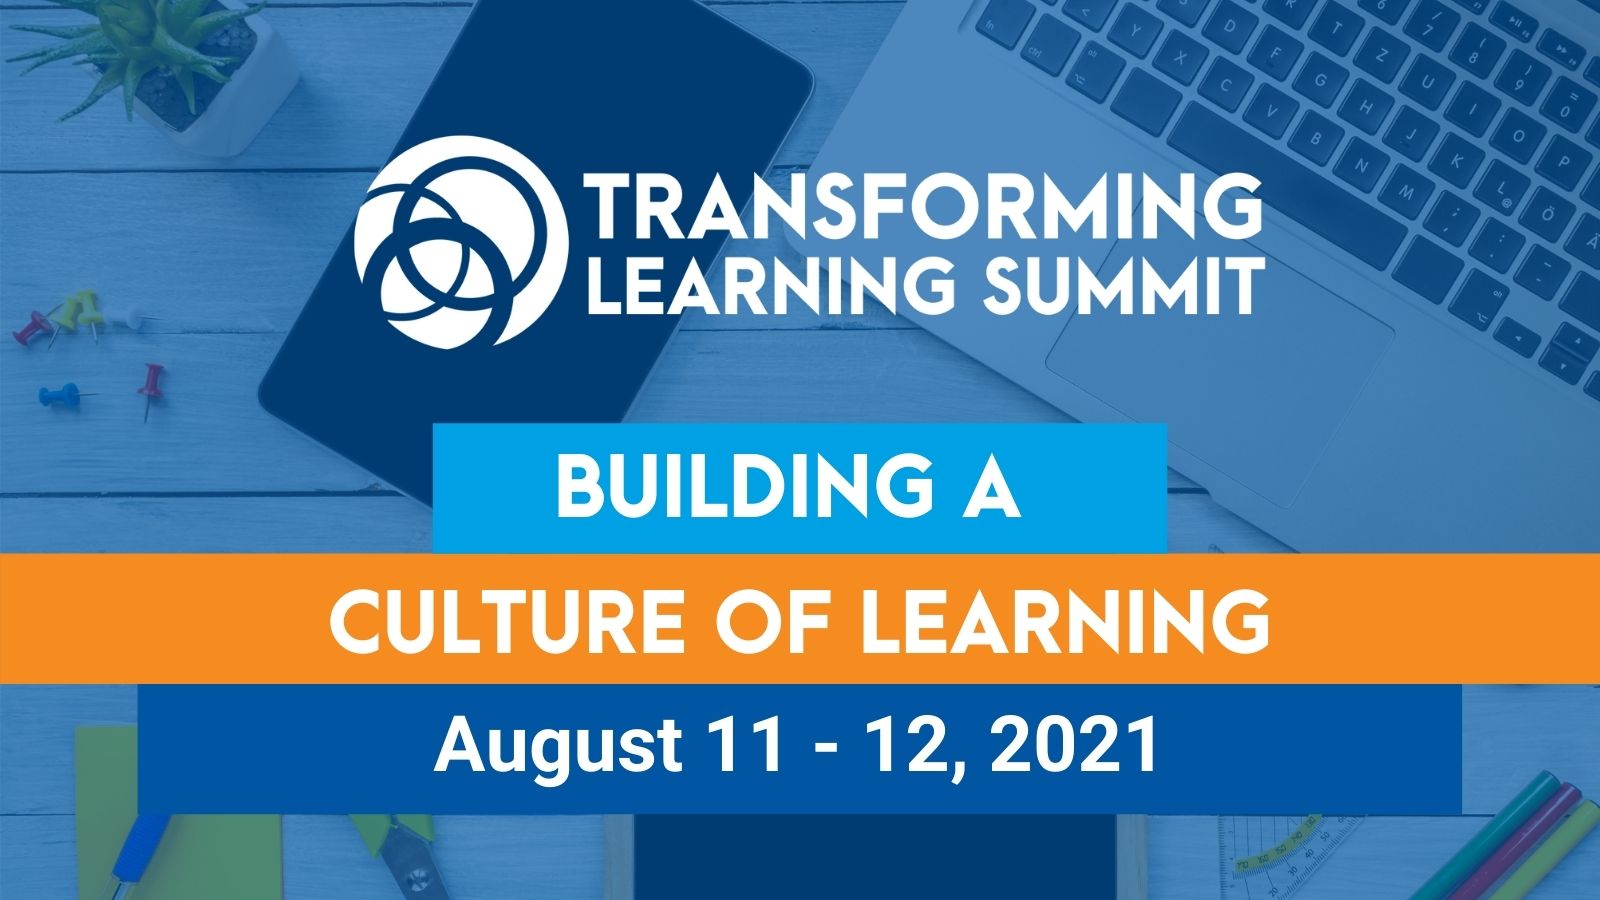 Transforming Learning Summit